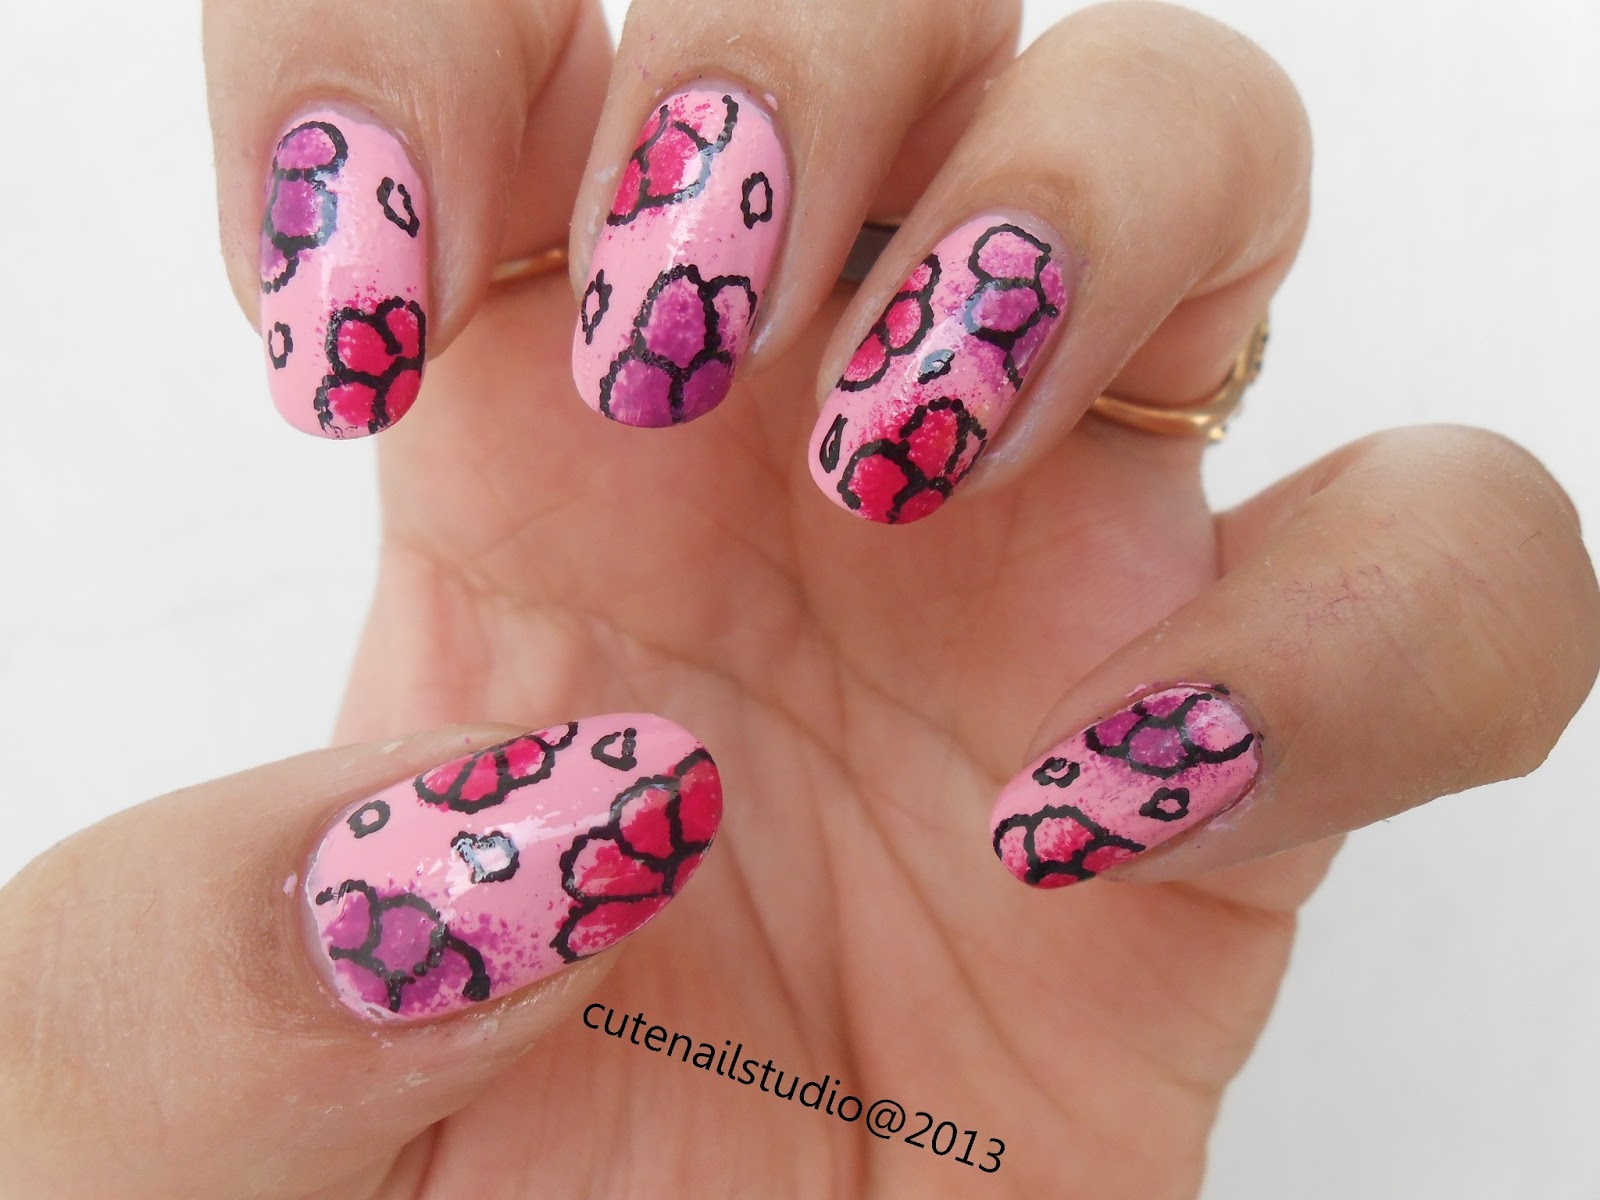 Cute nails: My Birthday nails: simple flower doodles